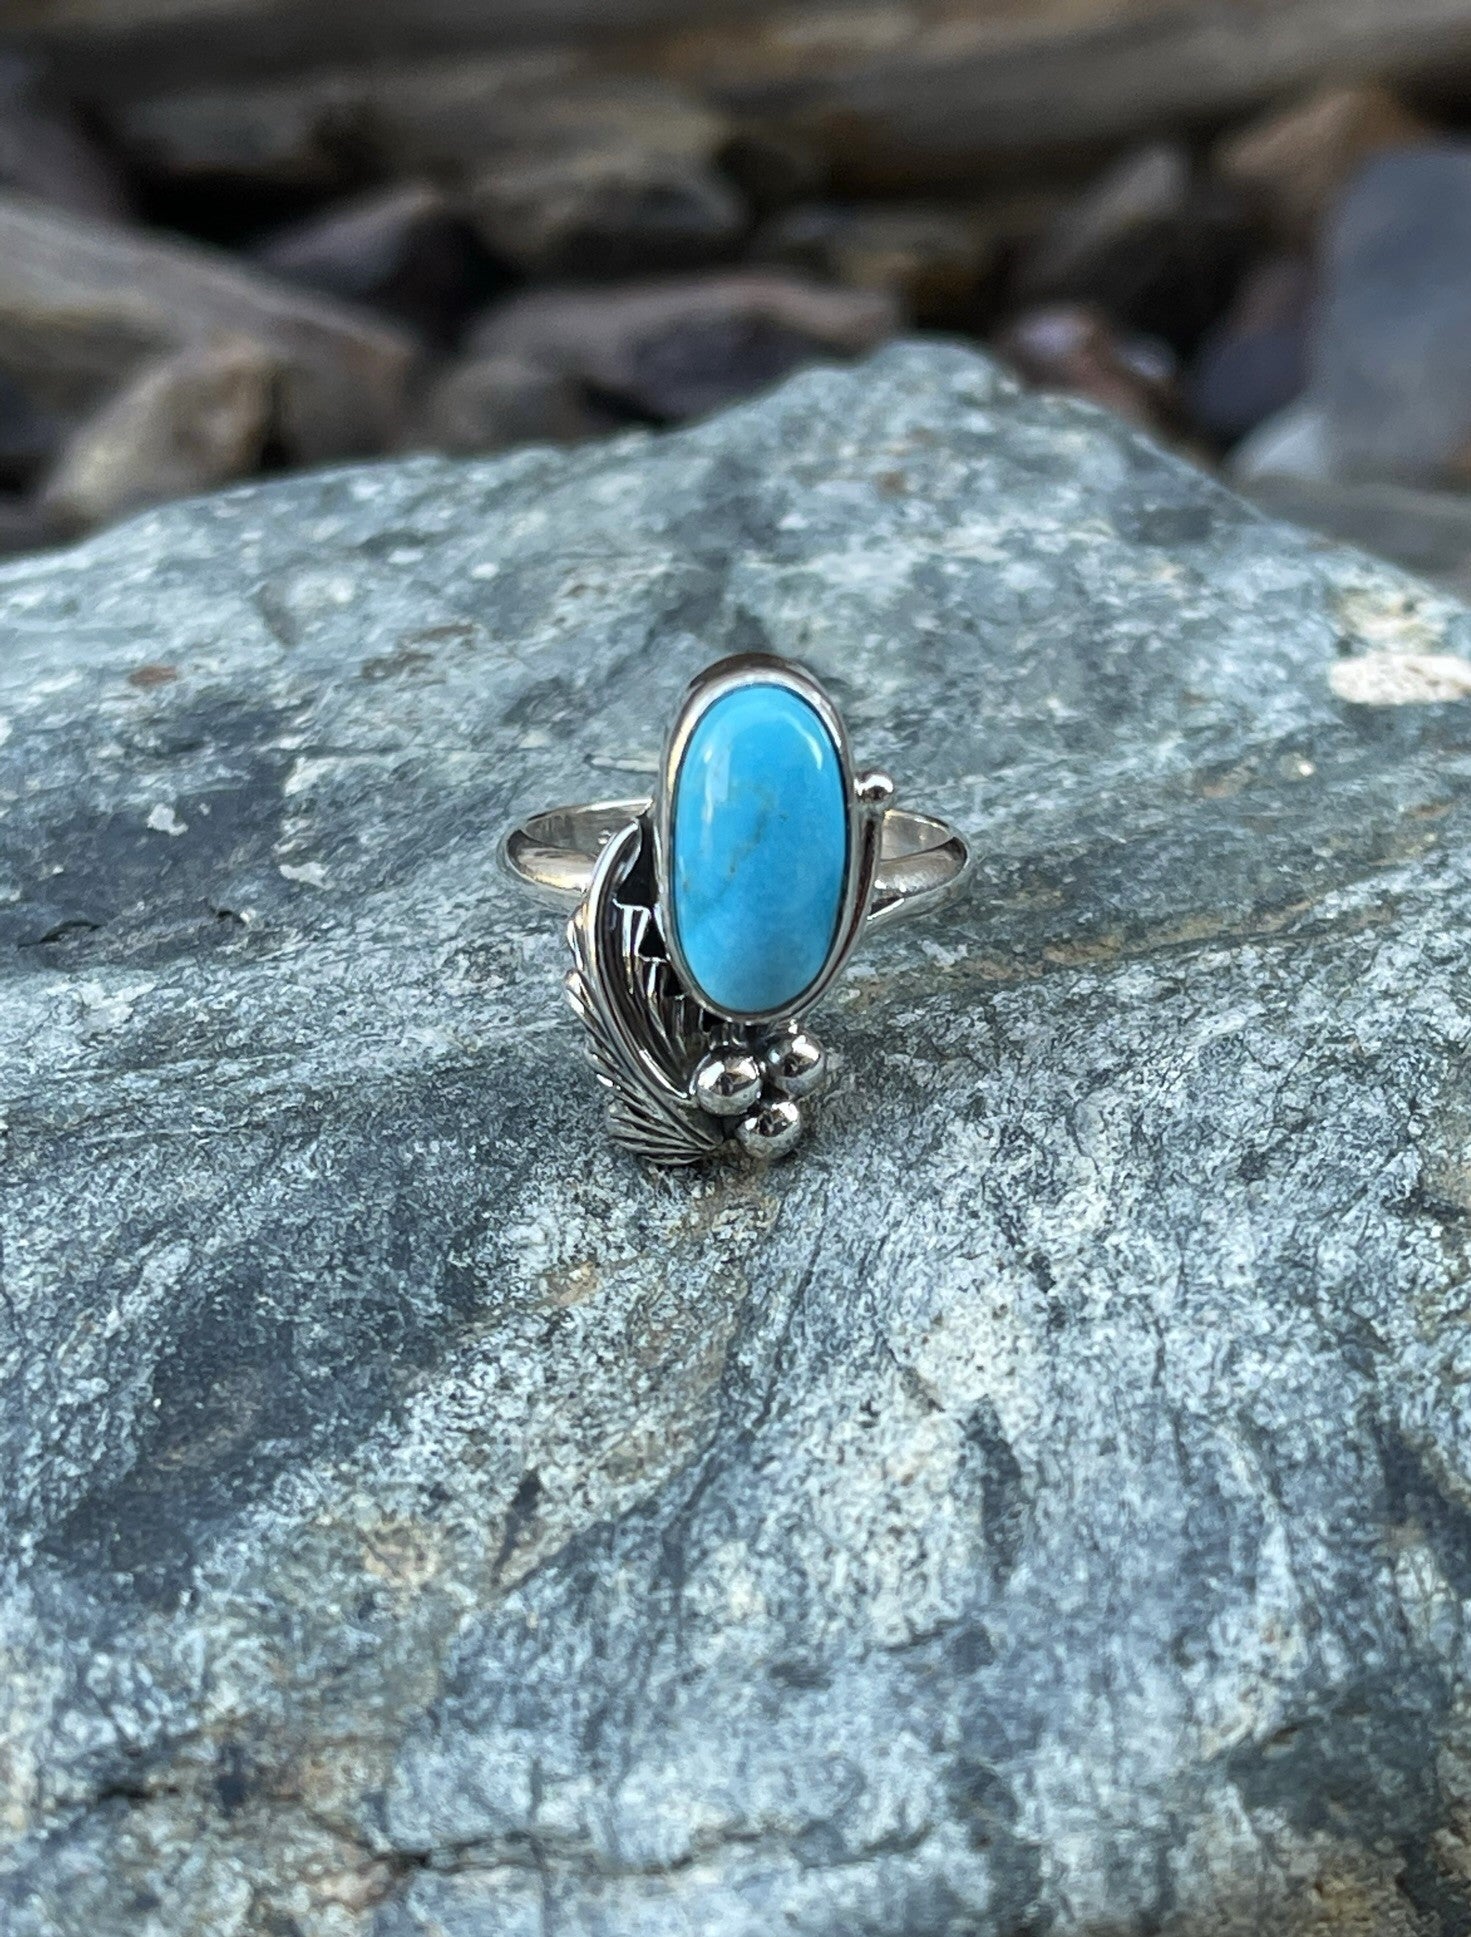 Hand Crafted Kingman Turquoise Ring with Feather and Bead Detail - Size 7 1/2